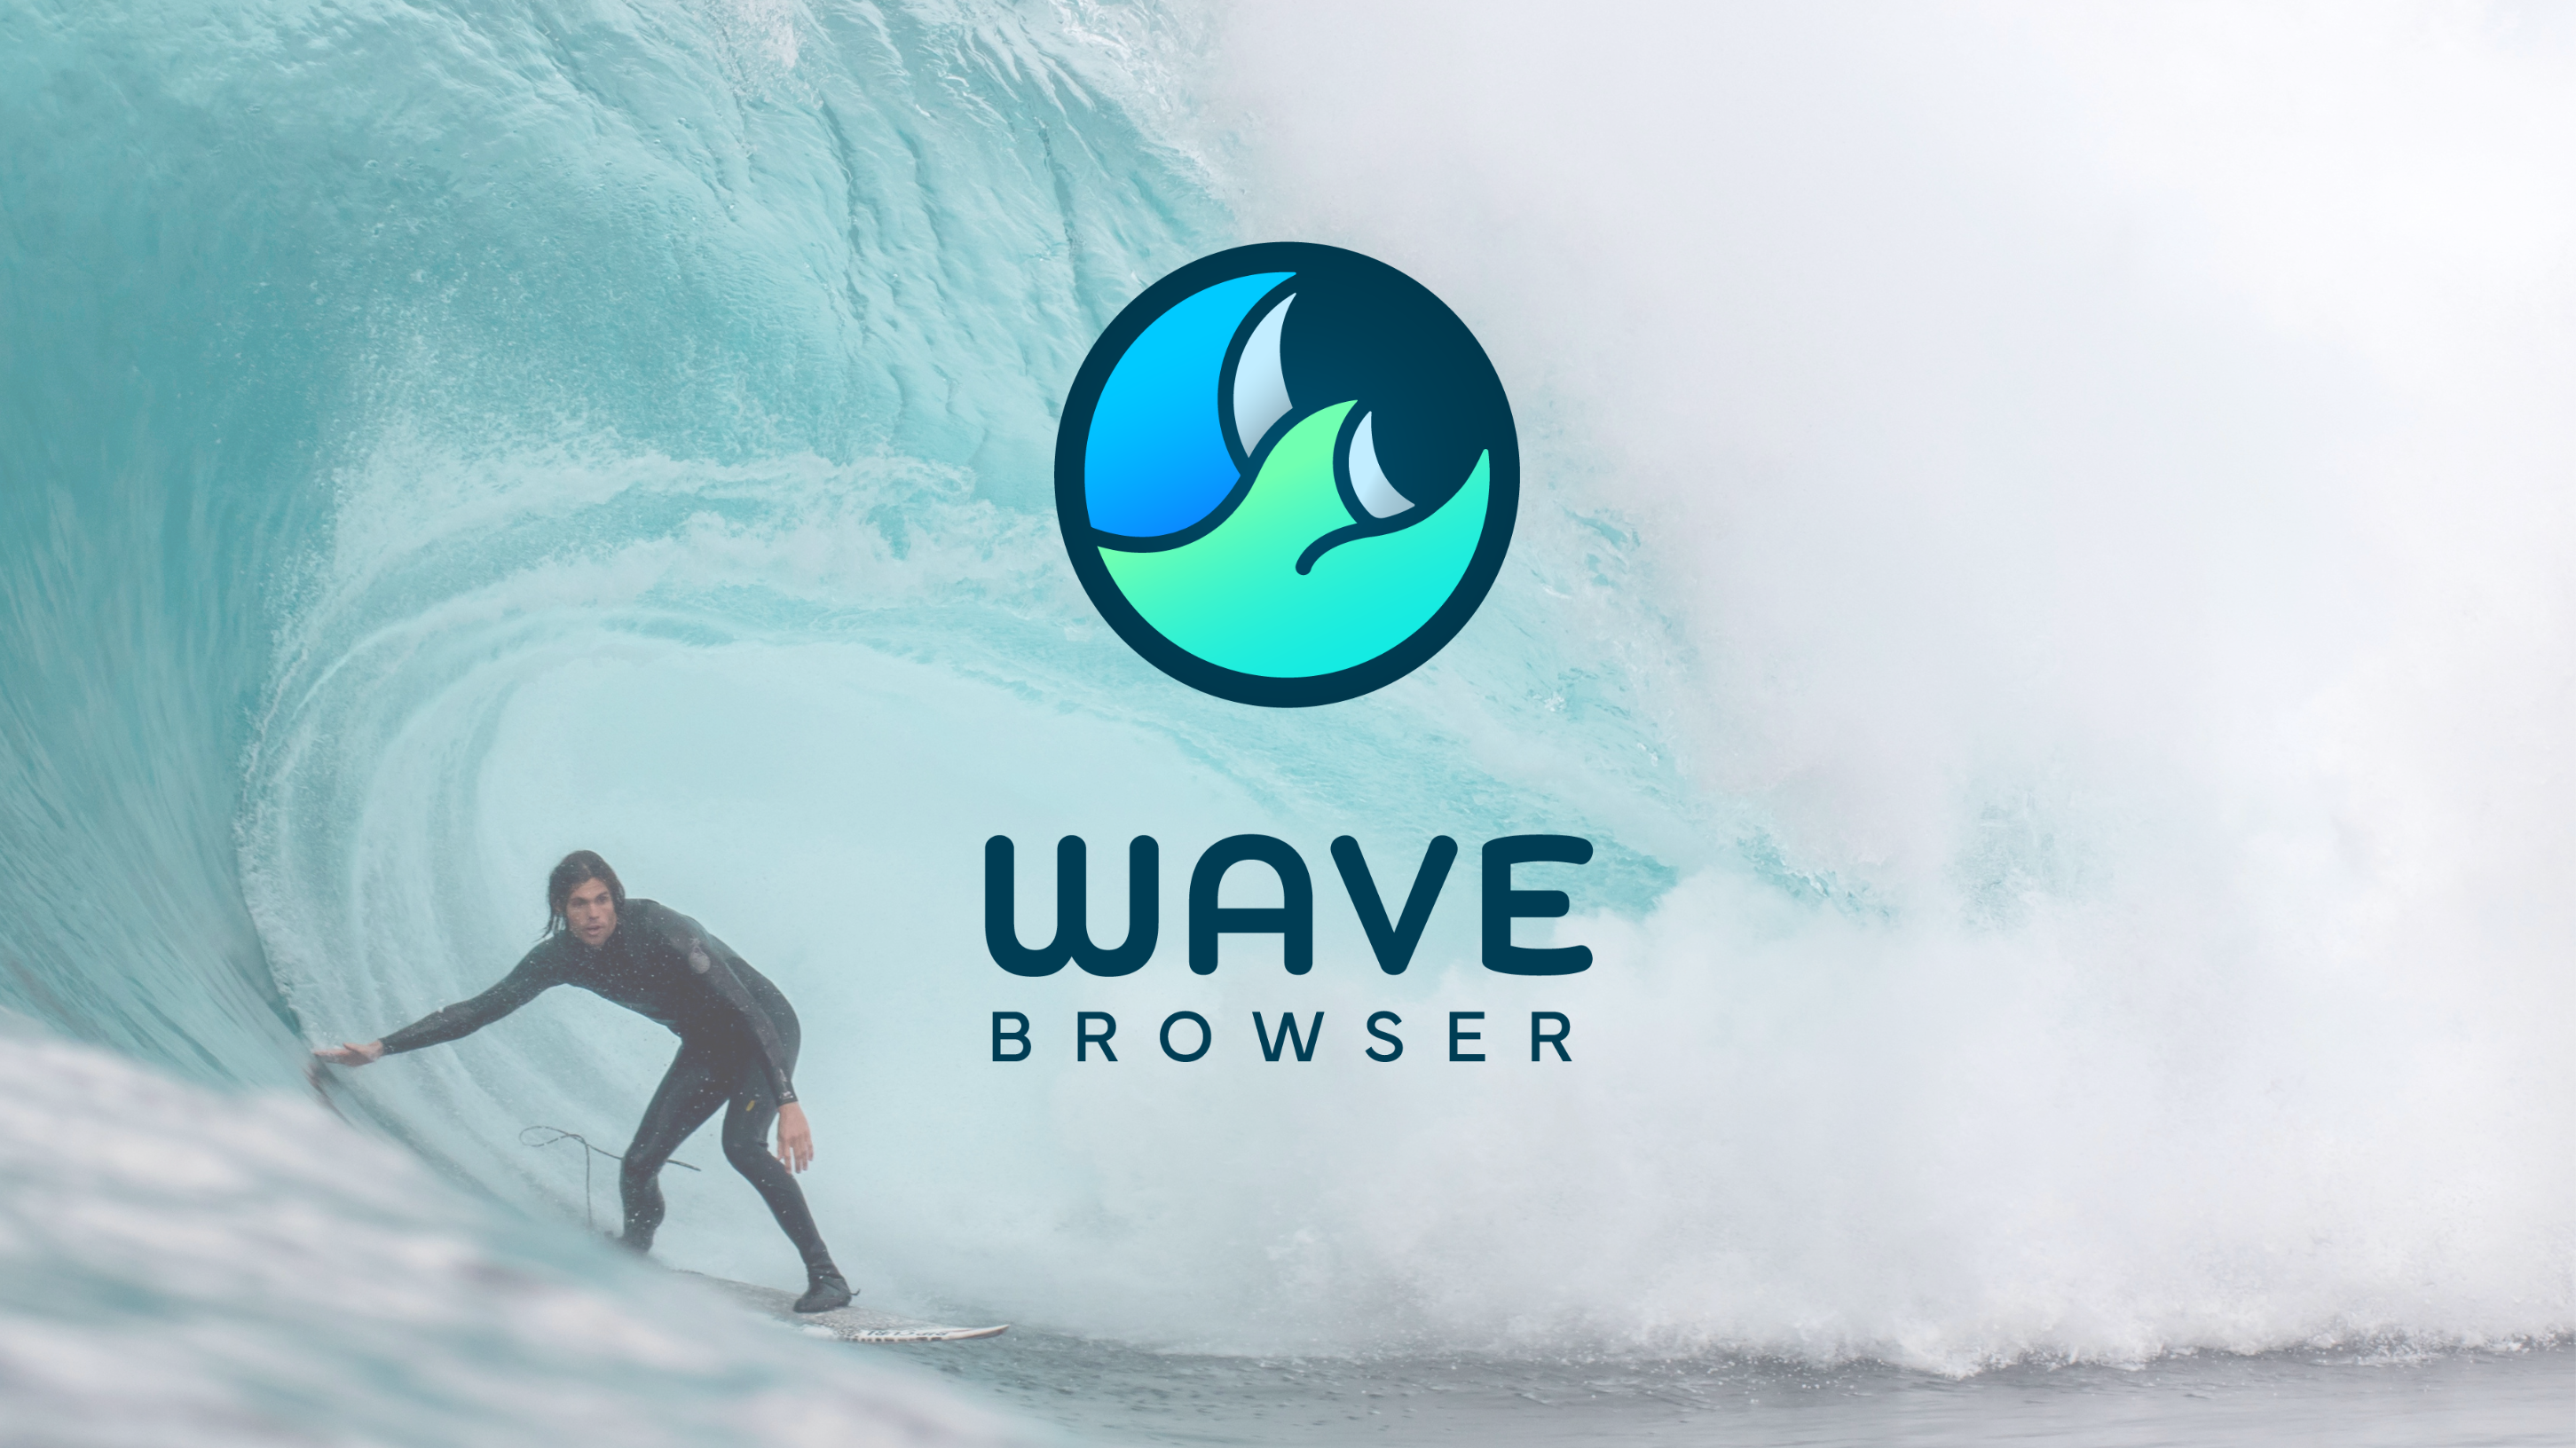 Introducing Wave Browser: The Efficient, Intuitive, and Personal Web Browser that Simplifies Productivity